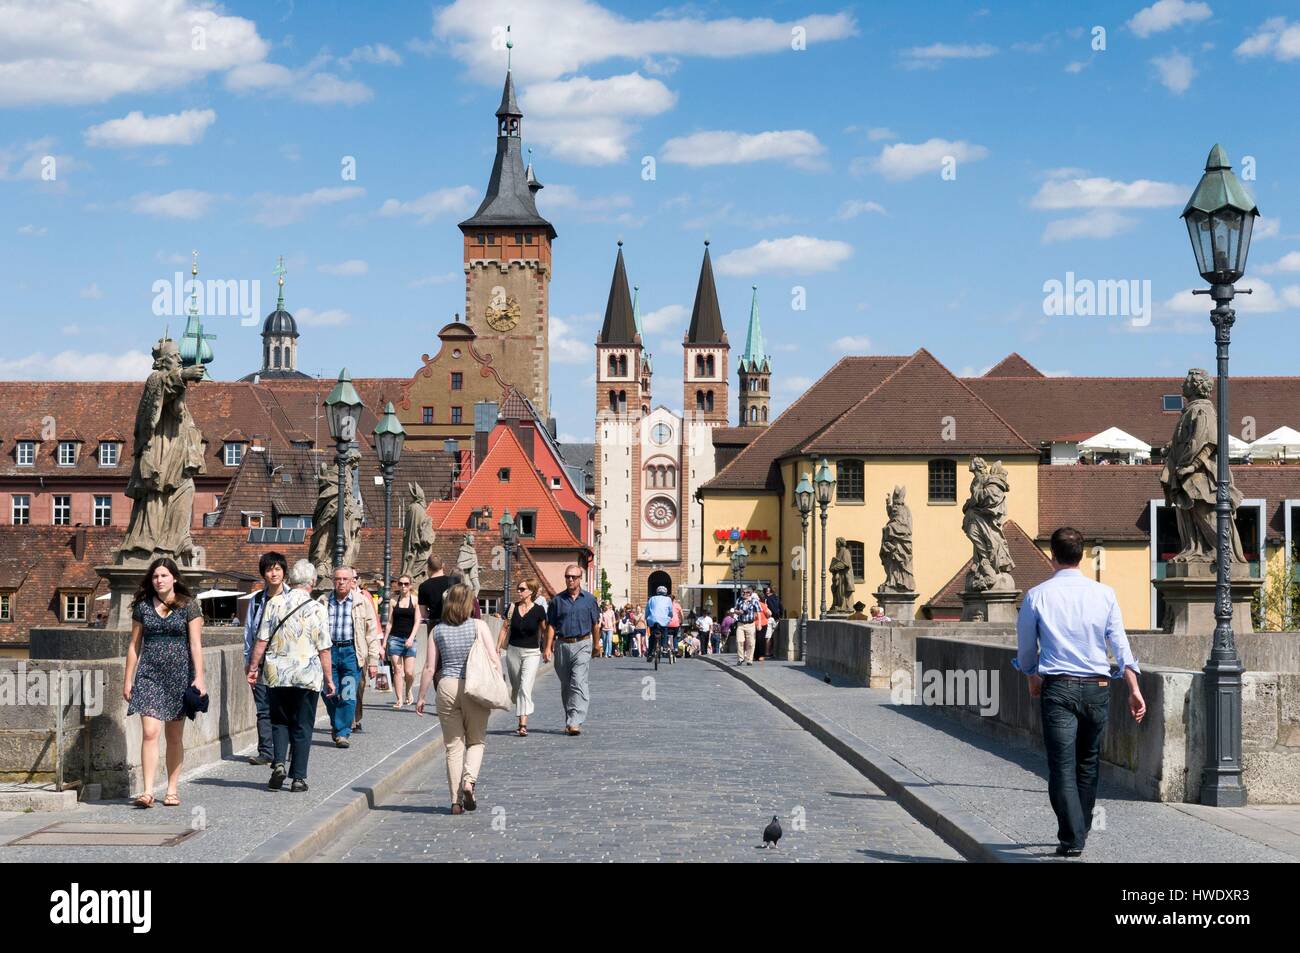 Germany, Bavaria, Würzburg, Old Bridge on the Main dated 15th century, City Hall tower and Saint Kilian Cathedral dated 12th century Stock Photo